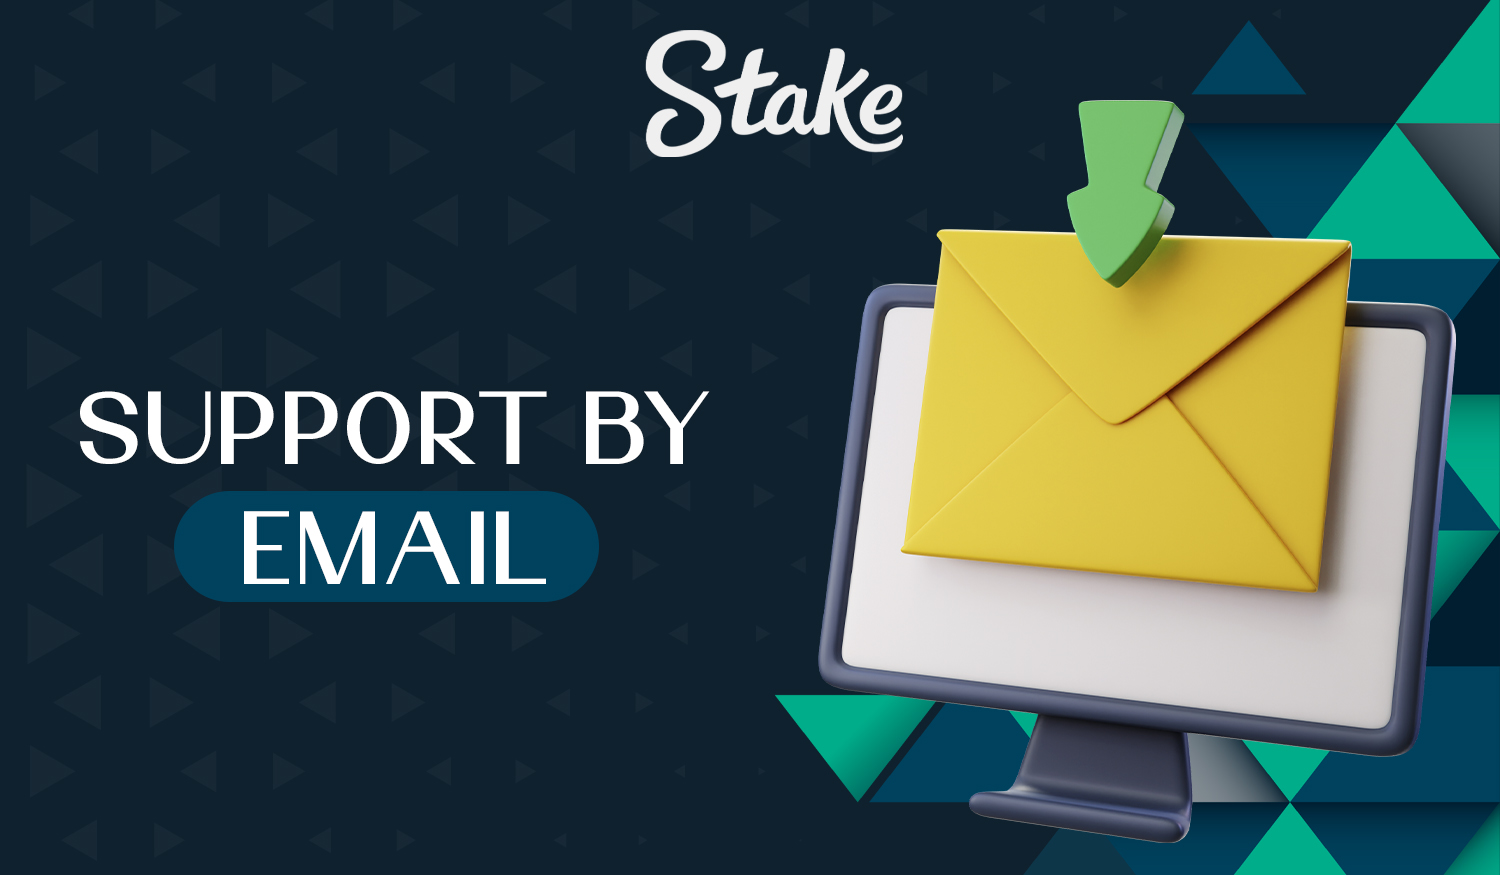 How Indian Stake users can contact support via email